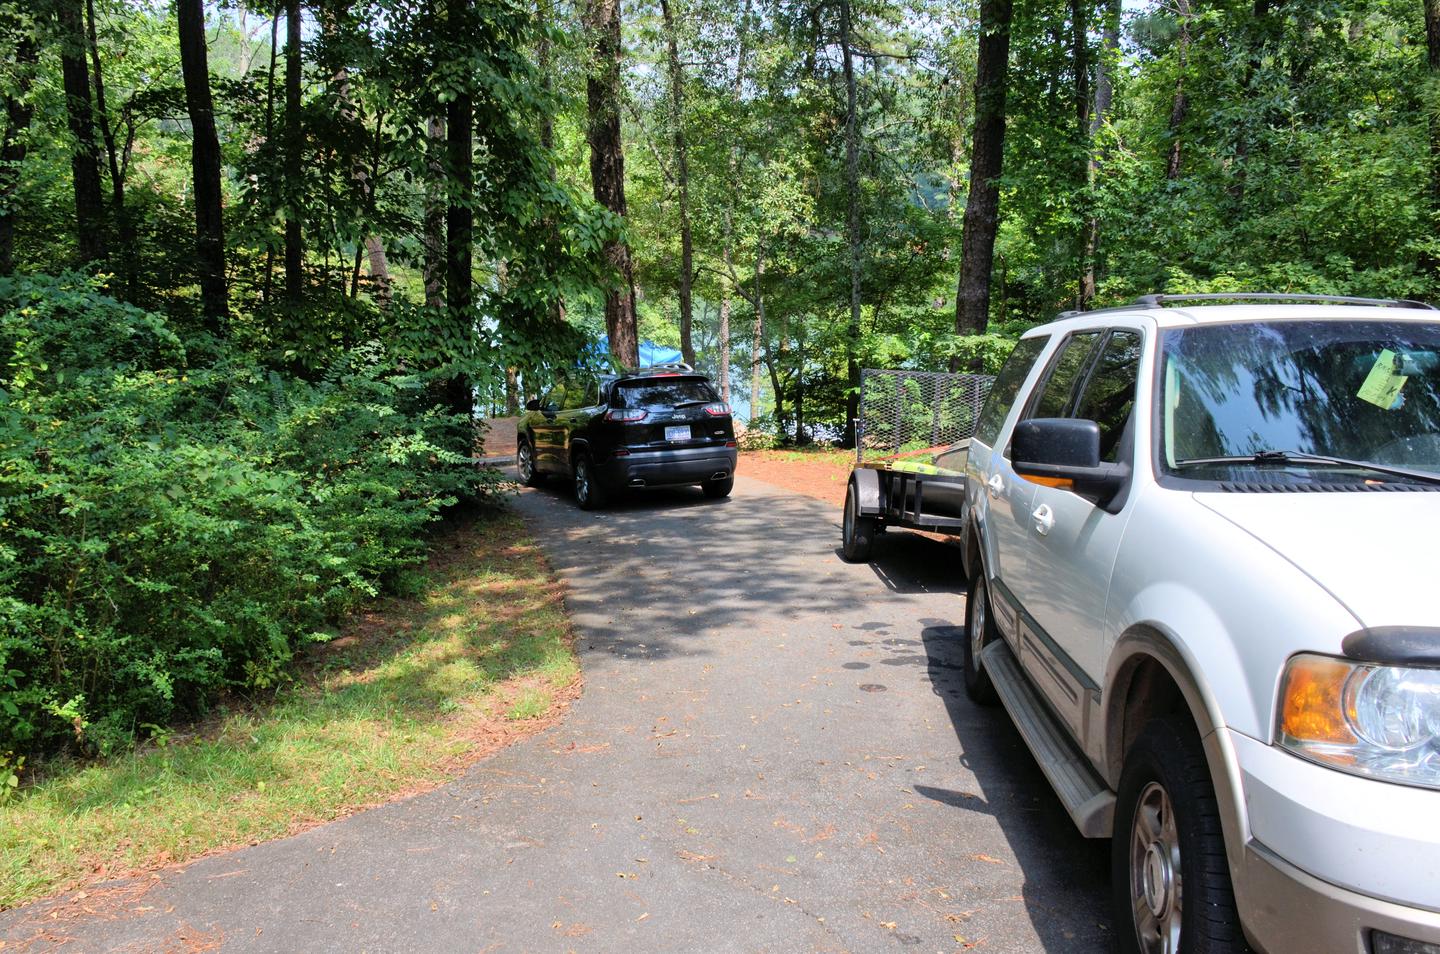 Driveway view.McKaskey Creek Campground, campsite 3.  Driveway is sloped, slanted and small.